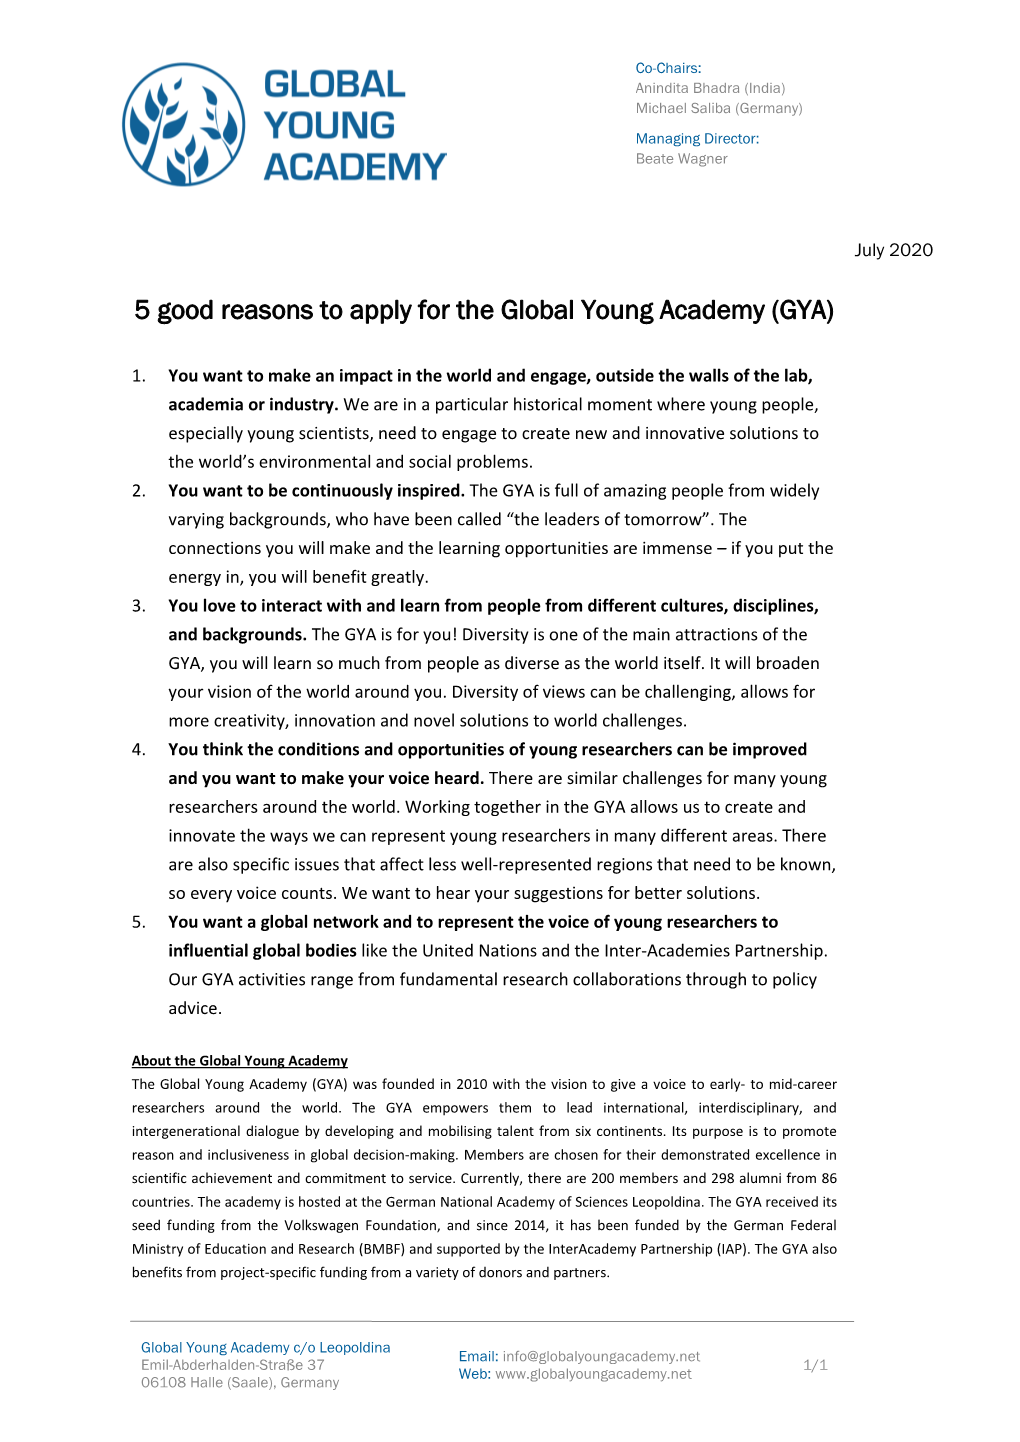 5 Good Reasons to Apply for the Global Young Academy (GYA)